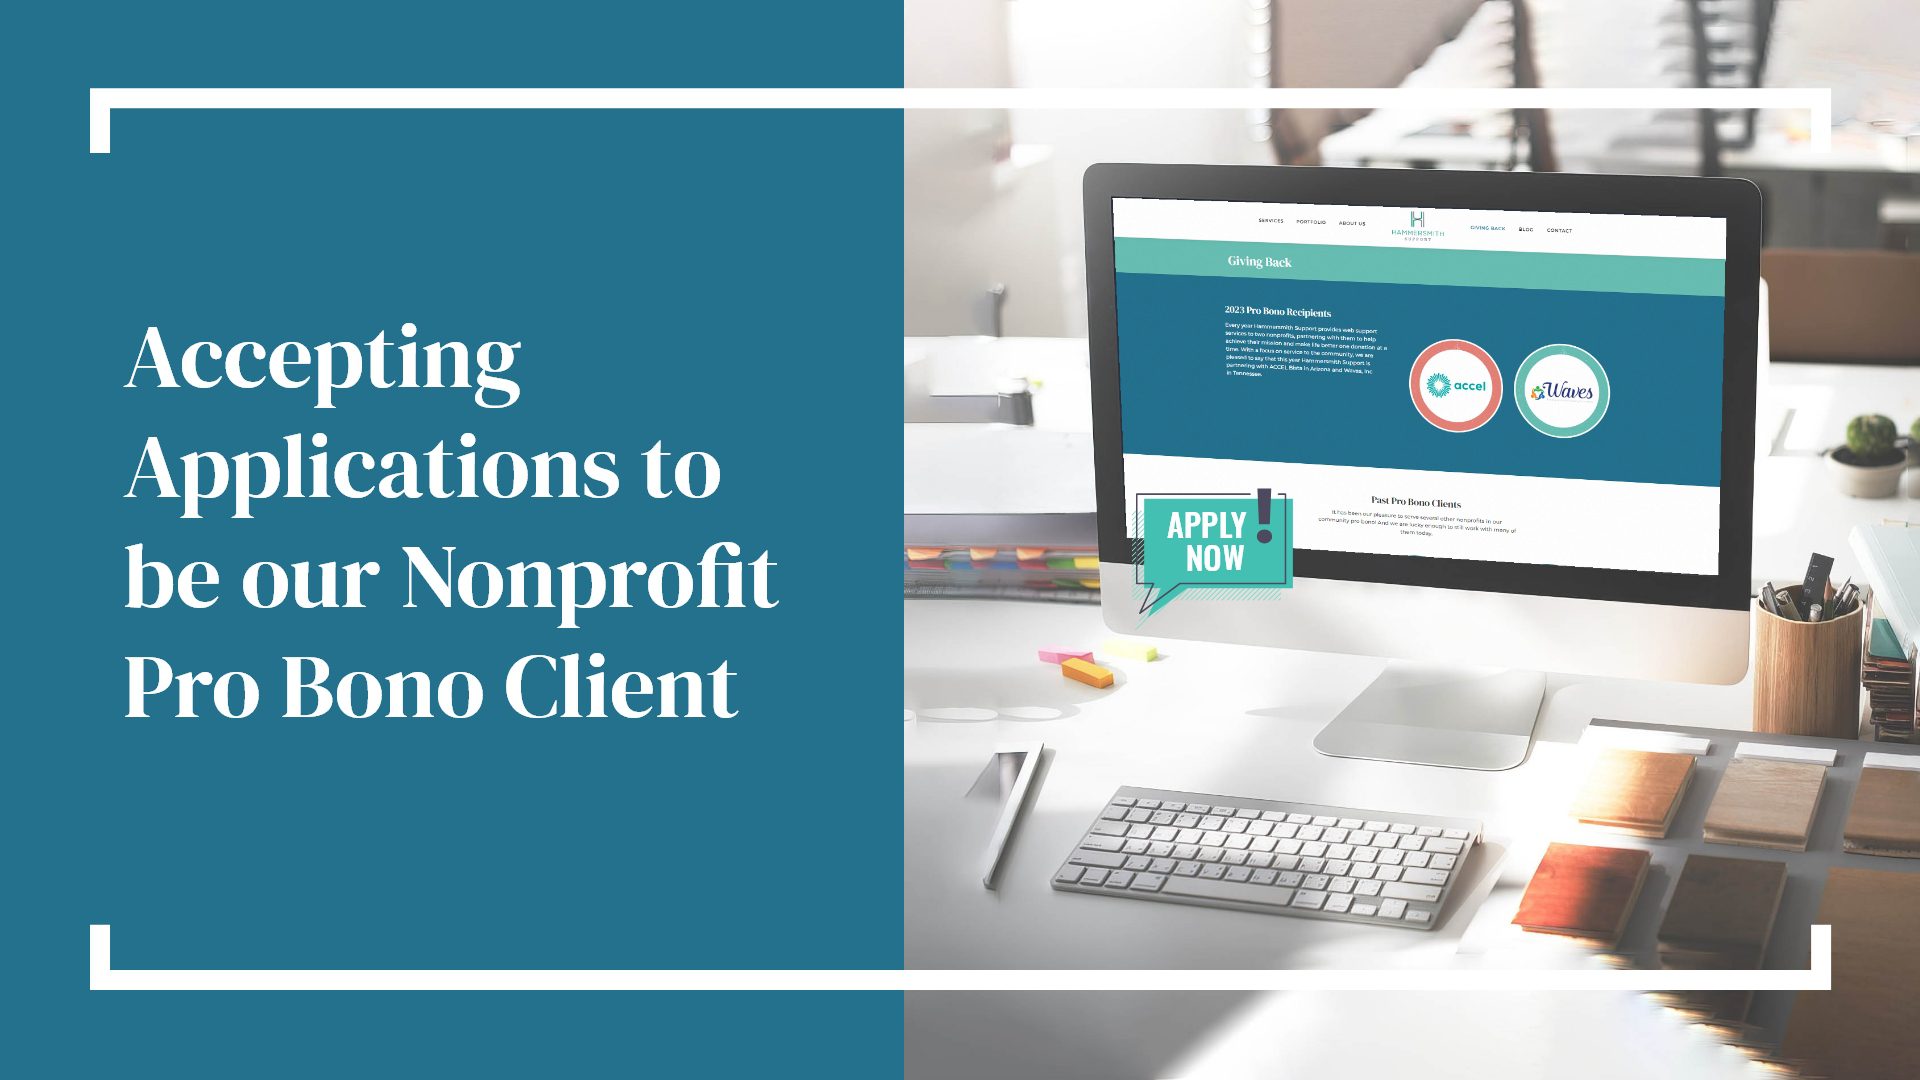 Accepting Applications to be our Nonprofit Pro Bono Client